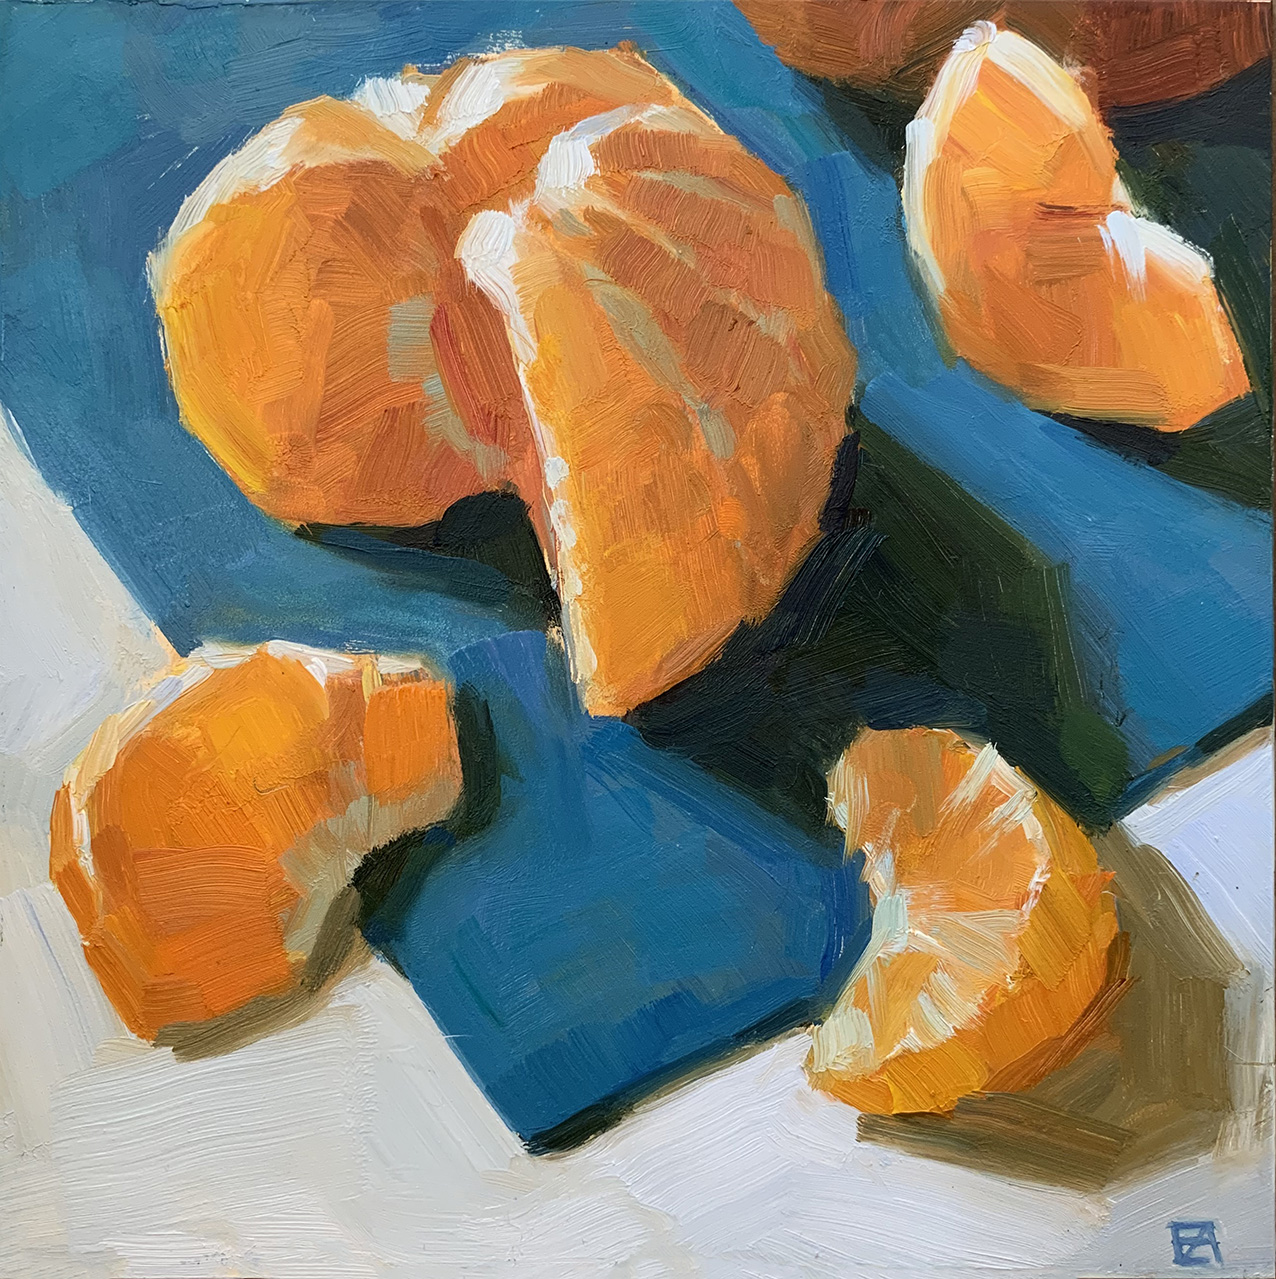   Mandarin and slices.    Oil on board 20 x 20 cm    2019  